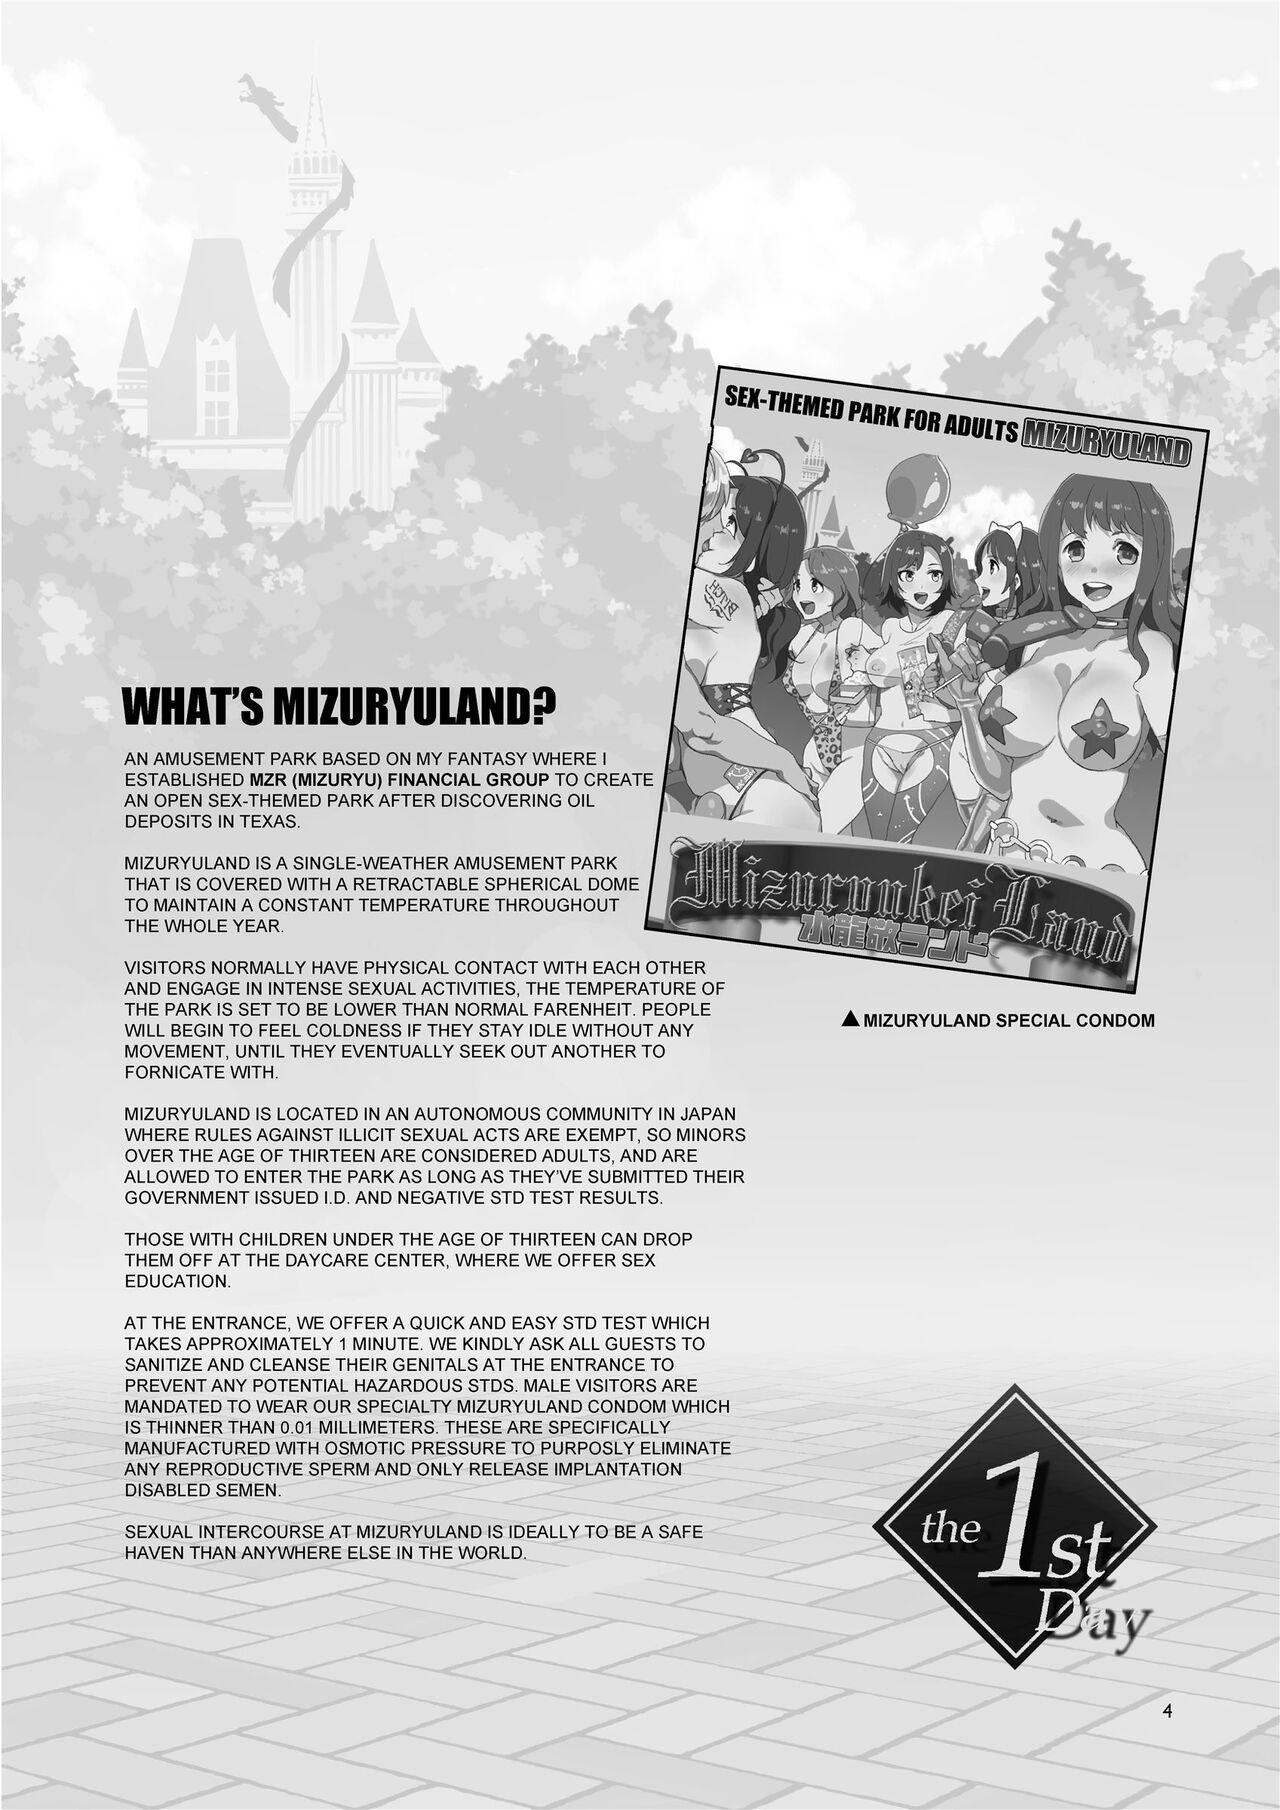 Puto Welcome to MizuryuLand! The 1st Day Gay Reality - Page 4